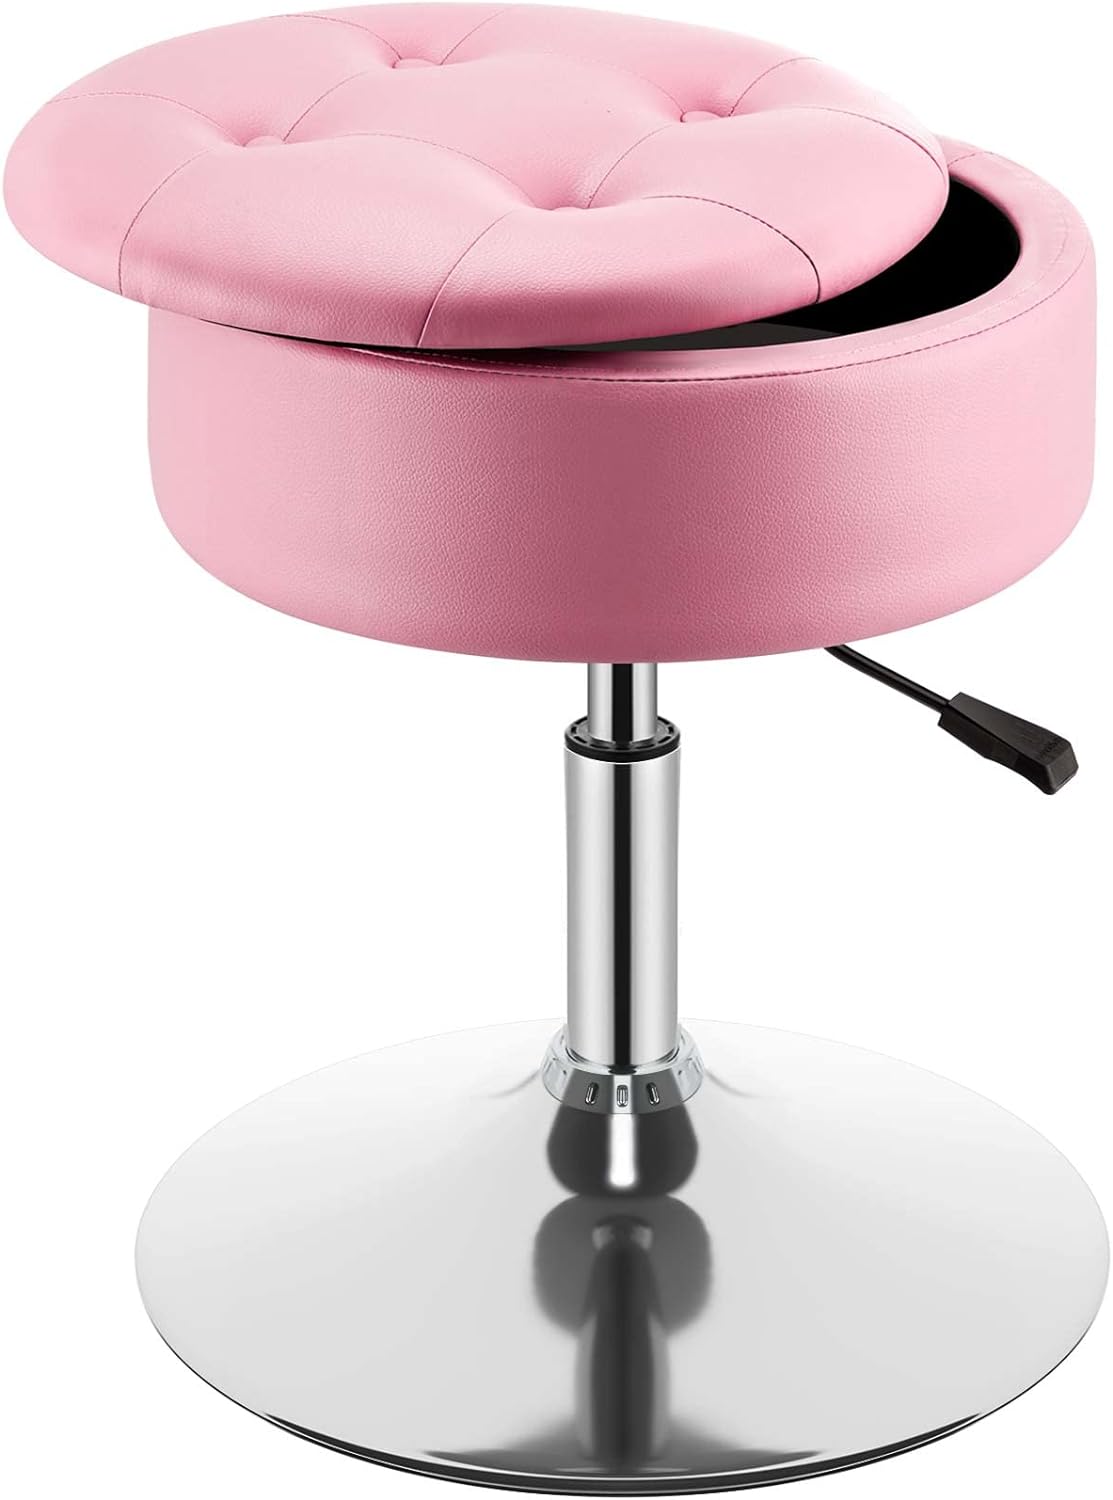 GREENSTELL Vanity Stool with Storage, 17.9 to 24.2 Height Adjustable PU Leather Vanity Chair, 360 Swivel Makeup Stool with Removeable Tray, Modern Large Size Ottoman for Bedroom Bathroom, Pink